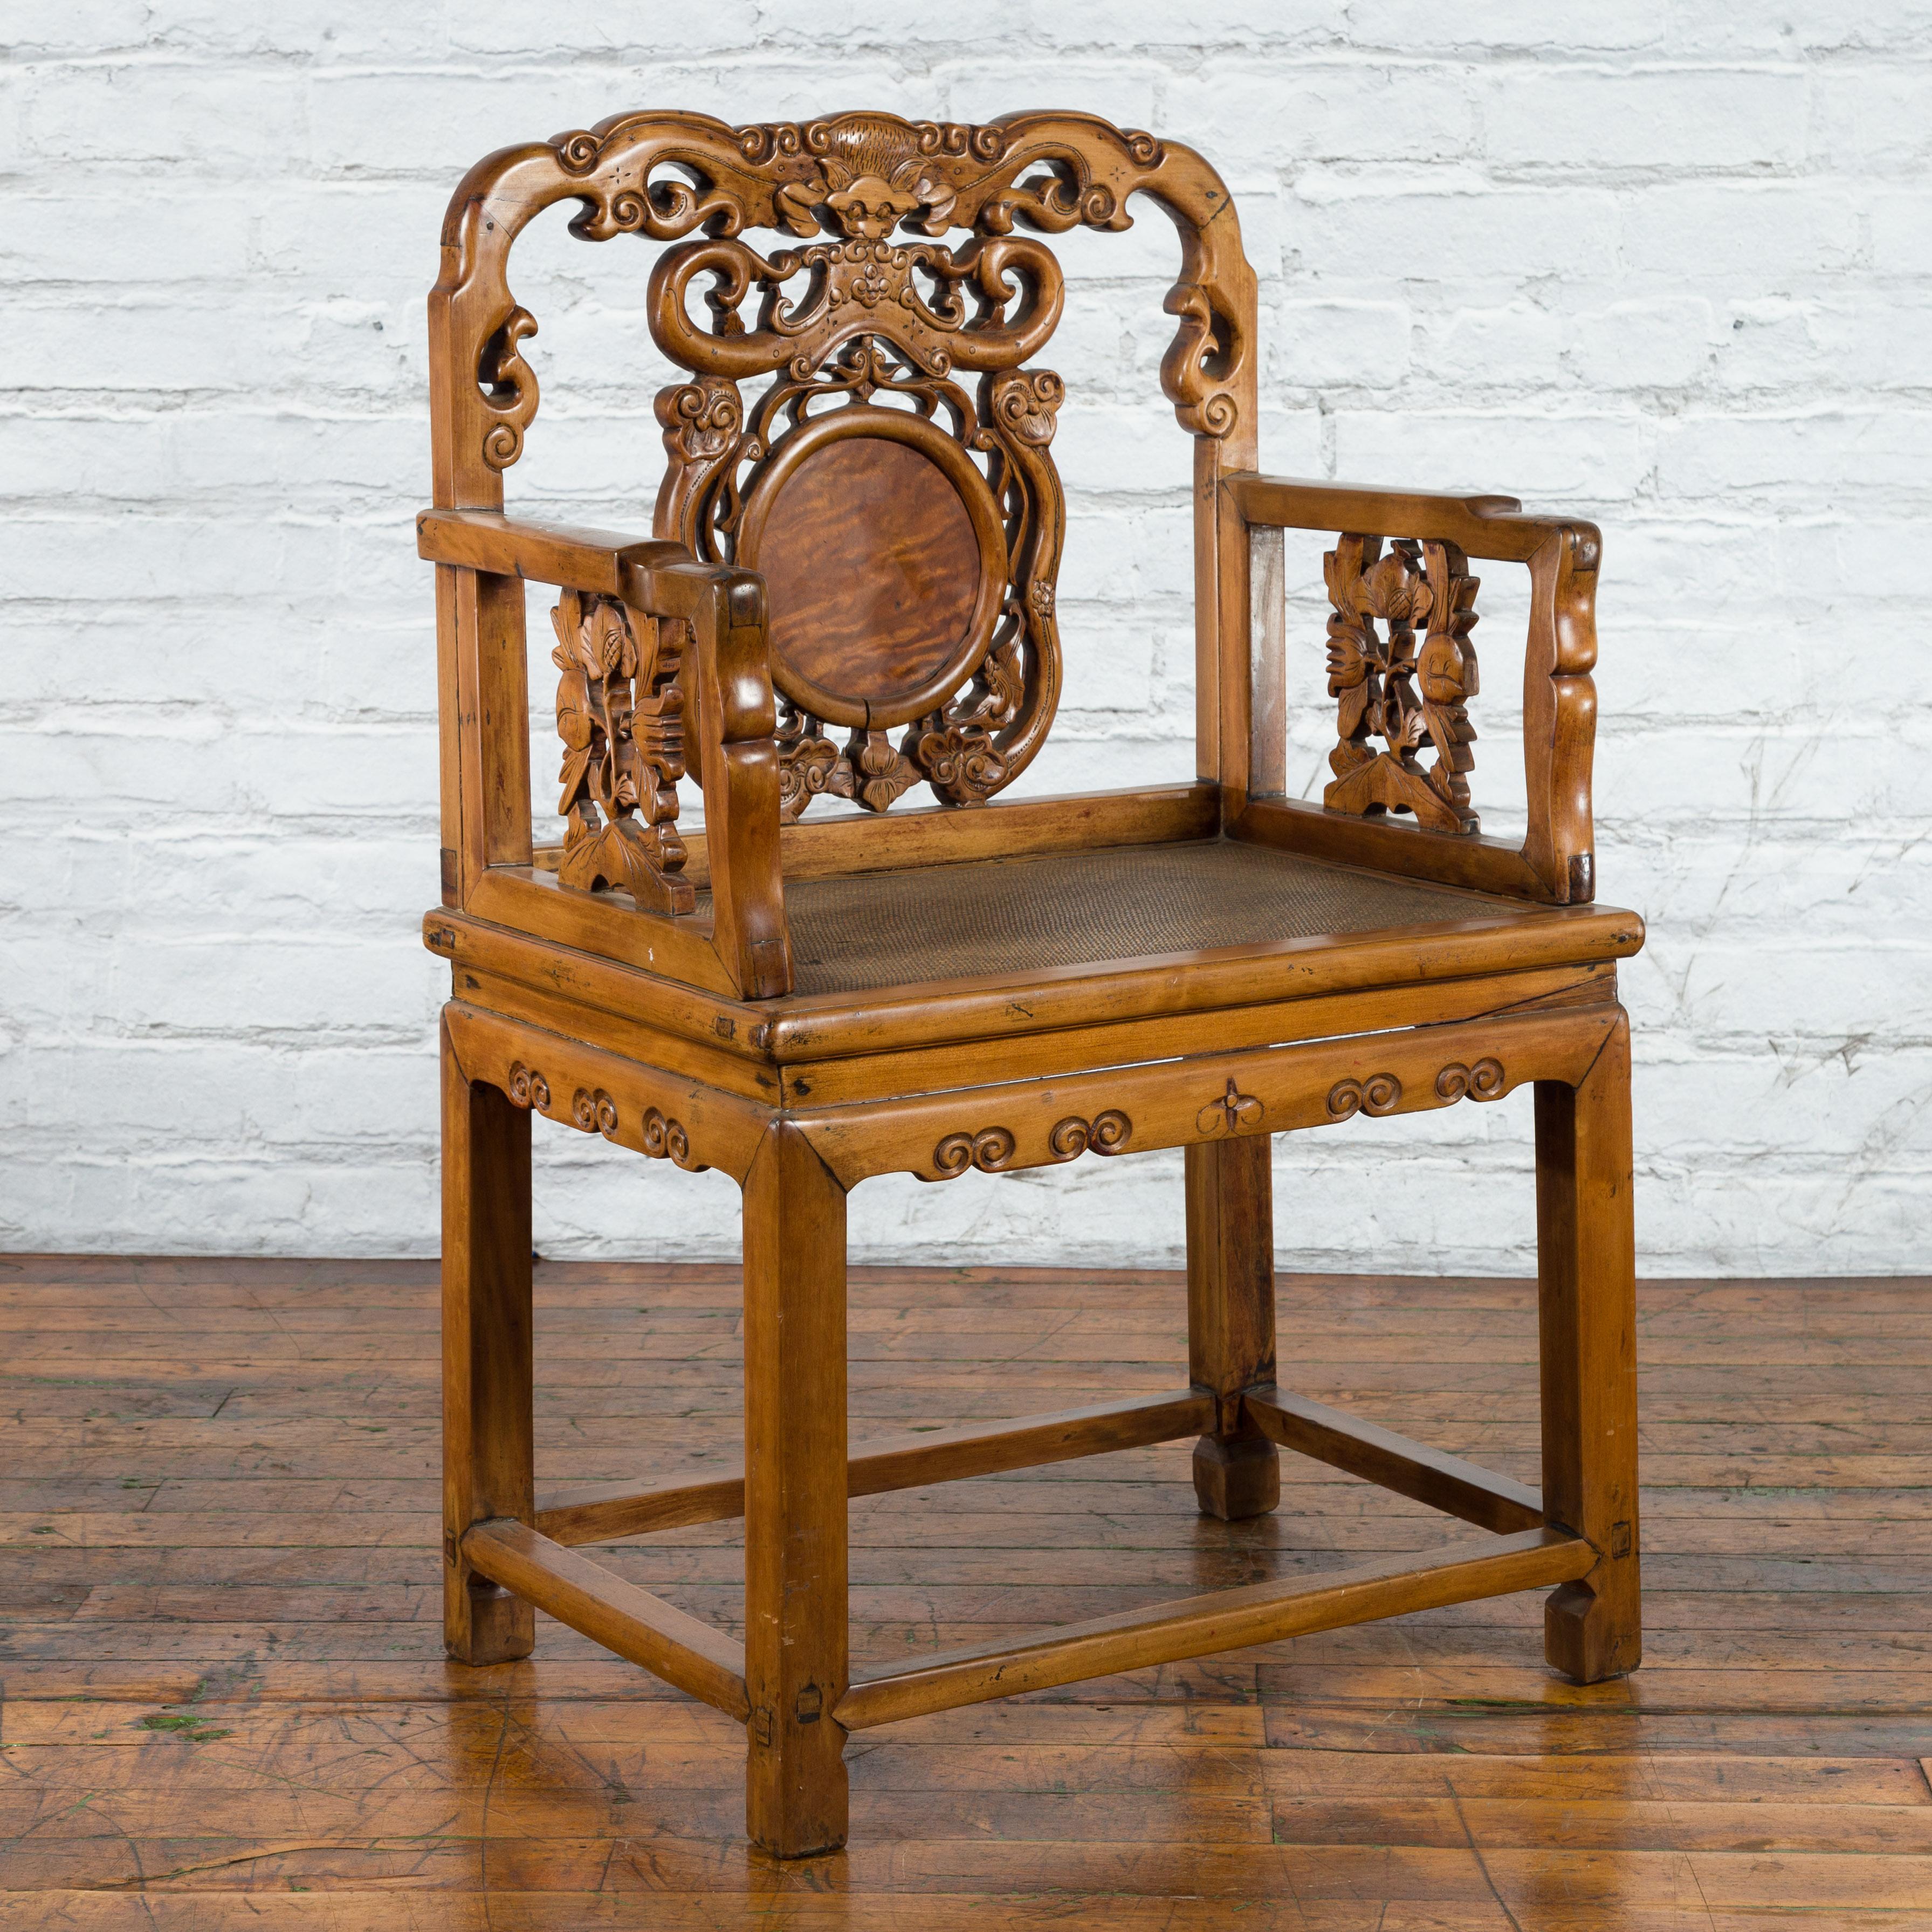 Chinese Antique Carved Wood Armchair with Medallion, Mythical Animal and Clouds For Sale 2